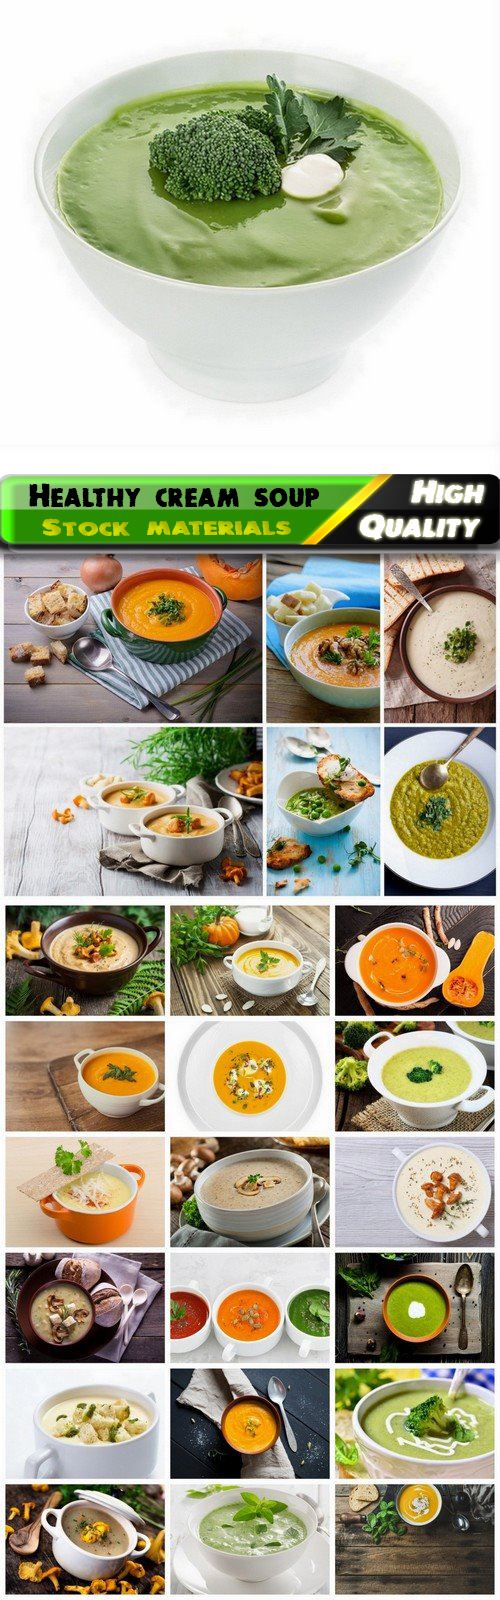 Healthy diet cream soup cooked from fresh vegetables - 25 HQ Jpg